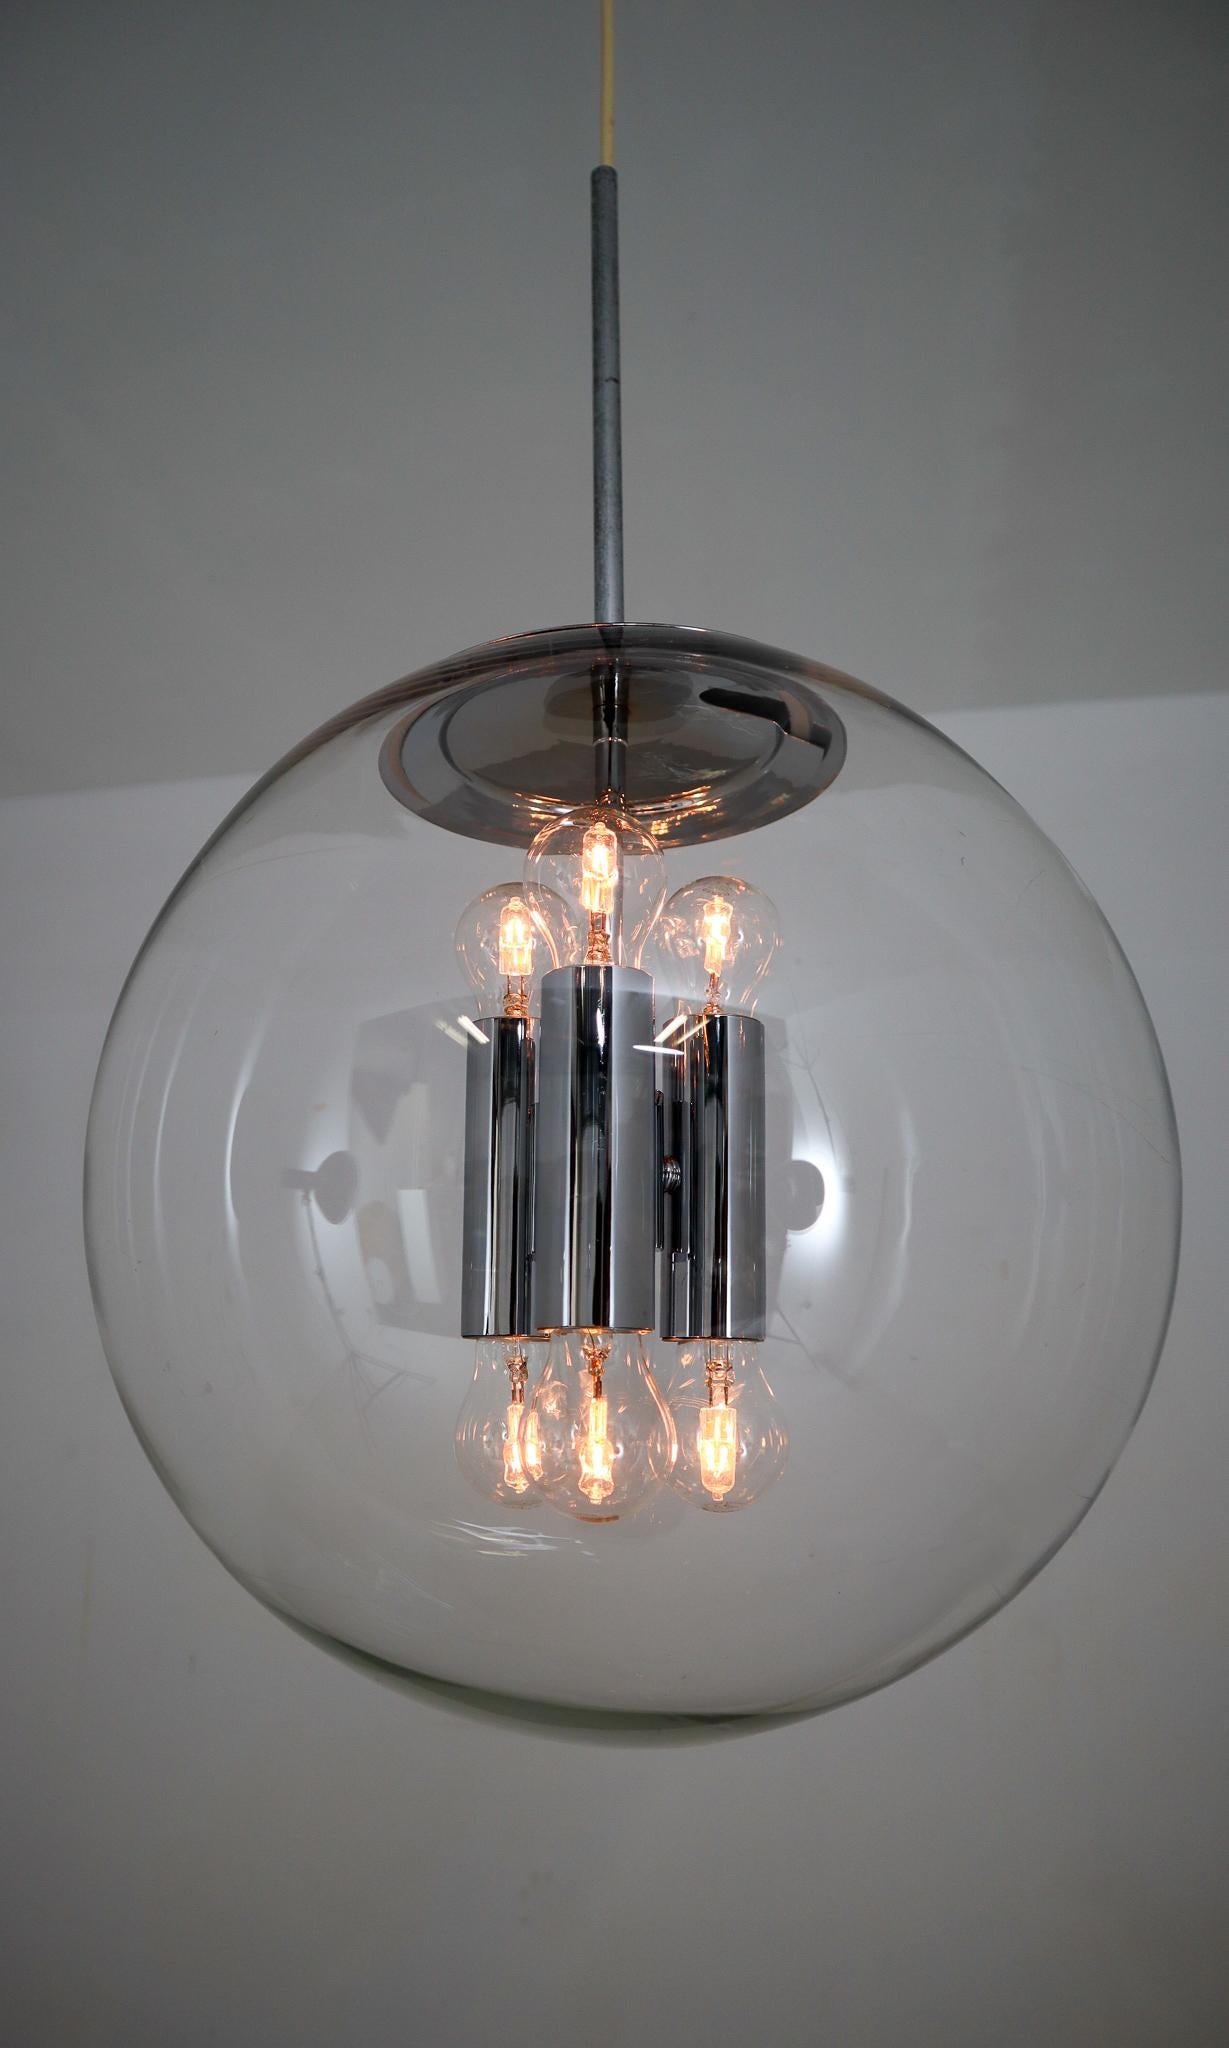 Large hand blown pendant lamps were made by the German manufacturer Limburg Glashütte in the 1970s. The hand blown glass globes are mounted on a chrome base. These heavy quality light sculptures not only function as light sources but also as a